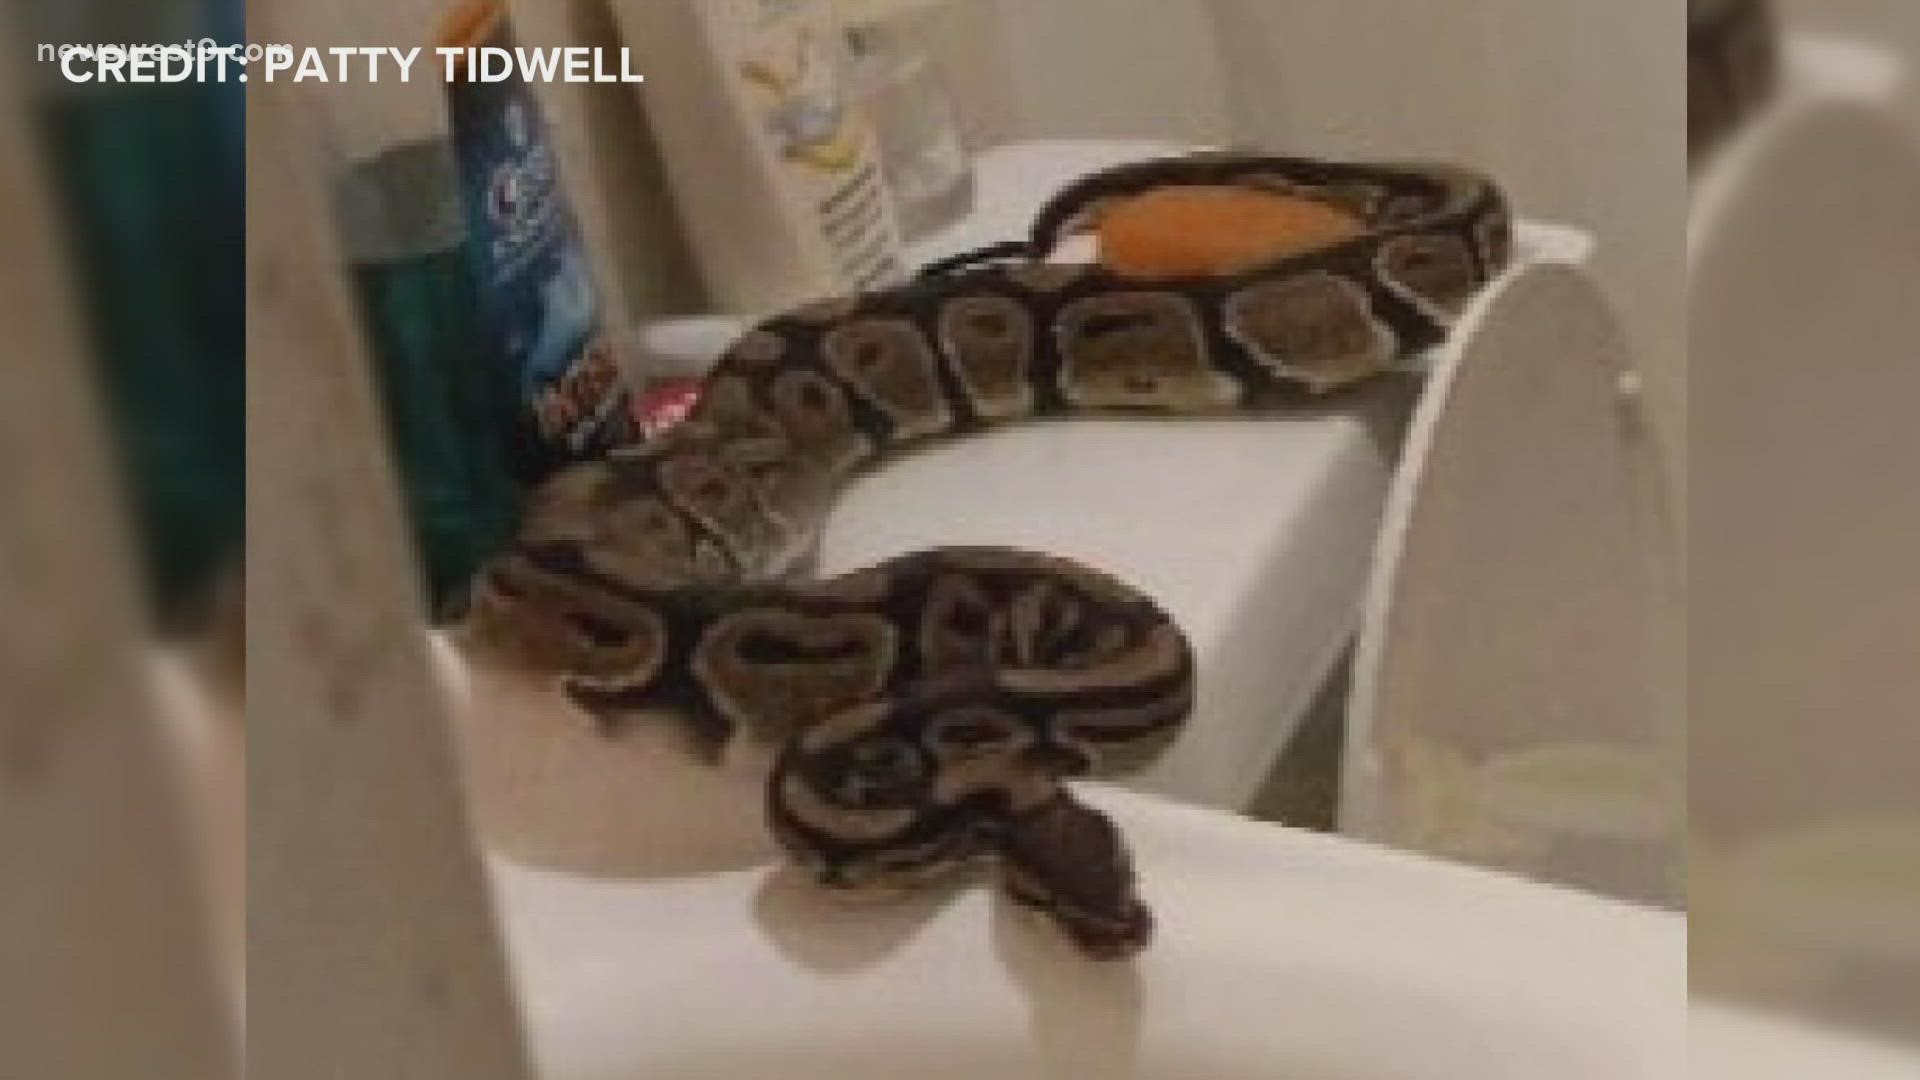 Patty Tidwell woke up to use the restroom in the middle of the night and found a massive python had crawled through the sewer line and out of the toilet.